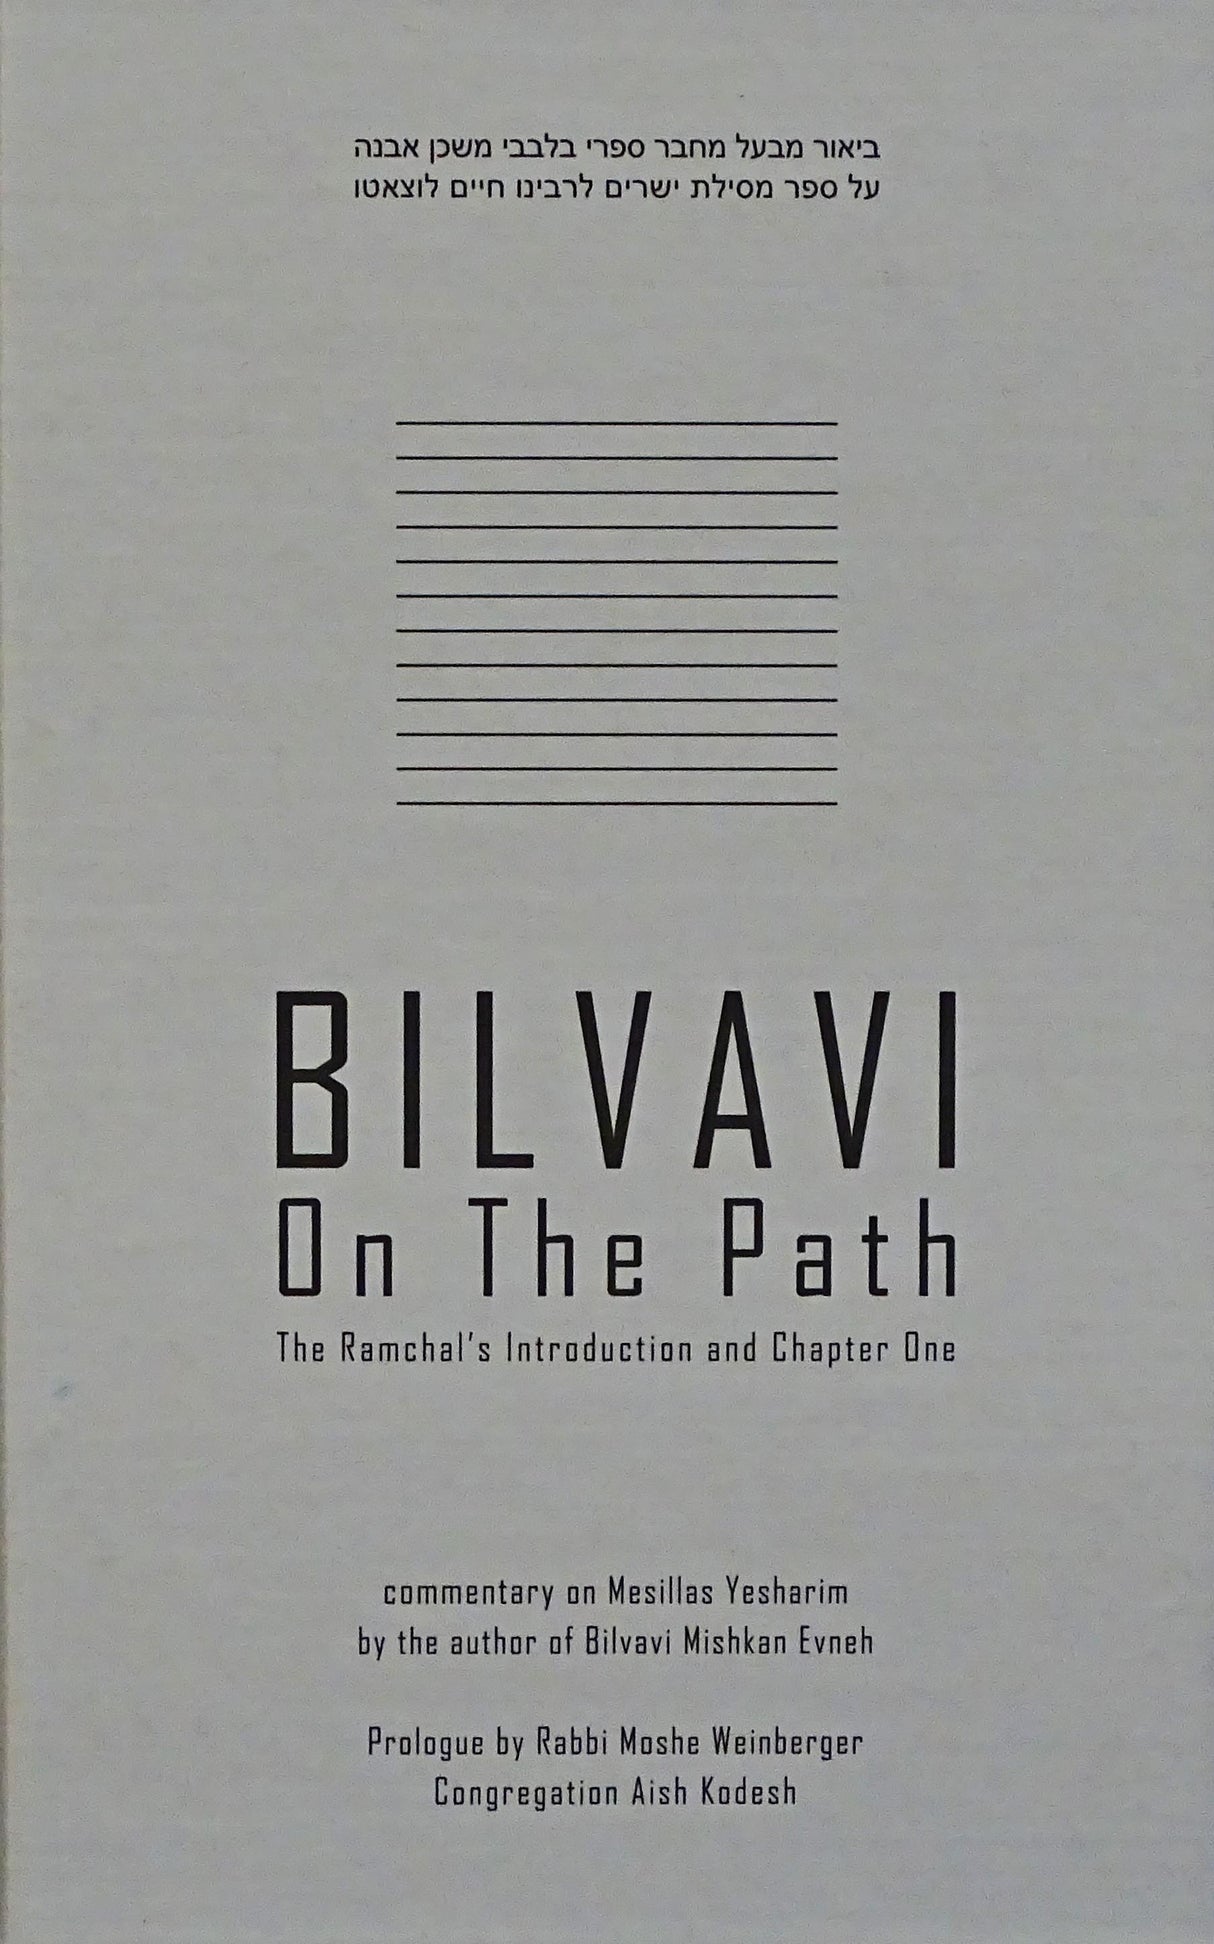 Bilvavi On The Path - The Ramchal's Introduction and Chapter One